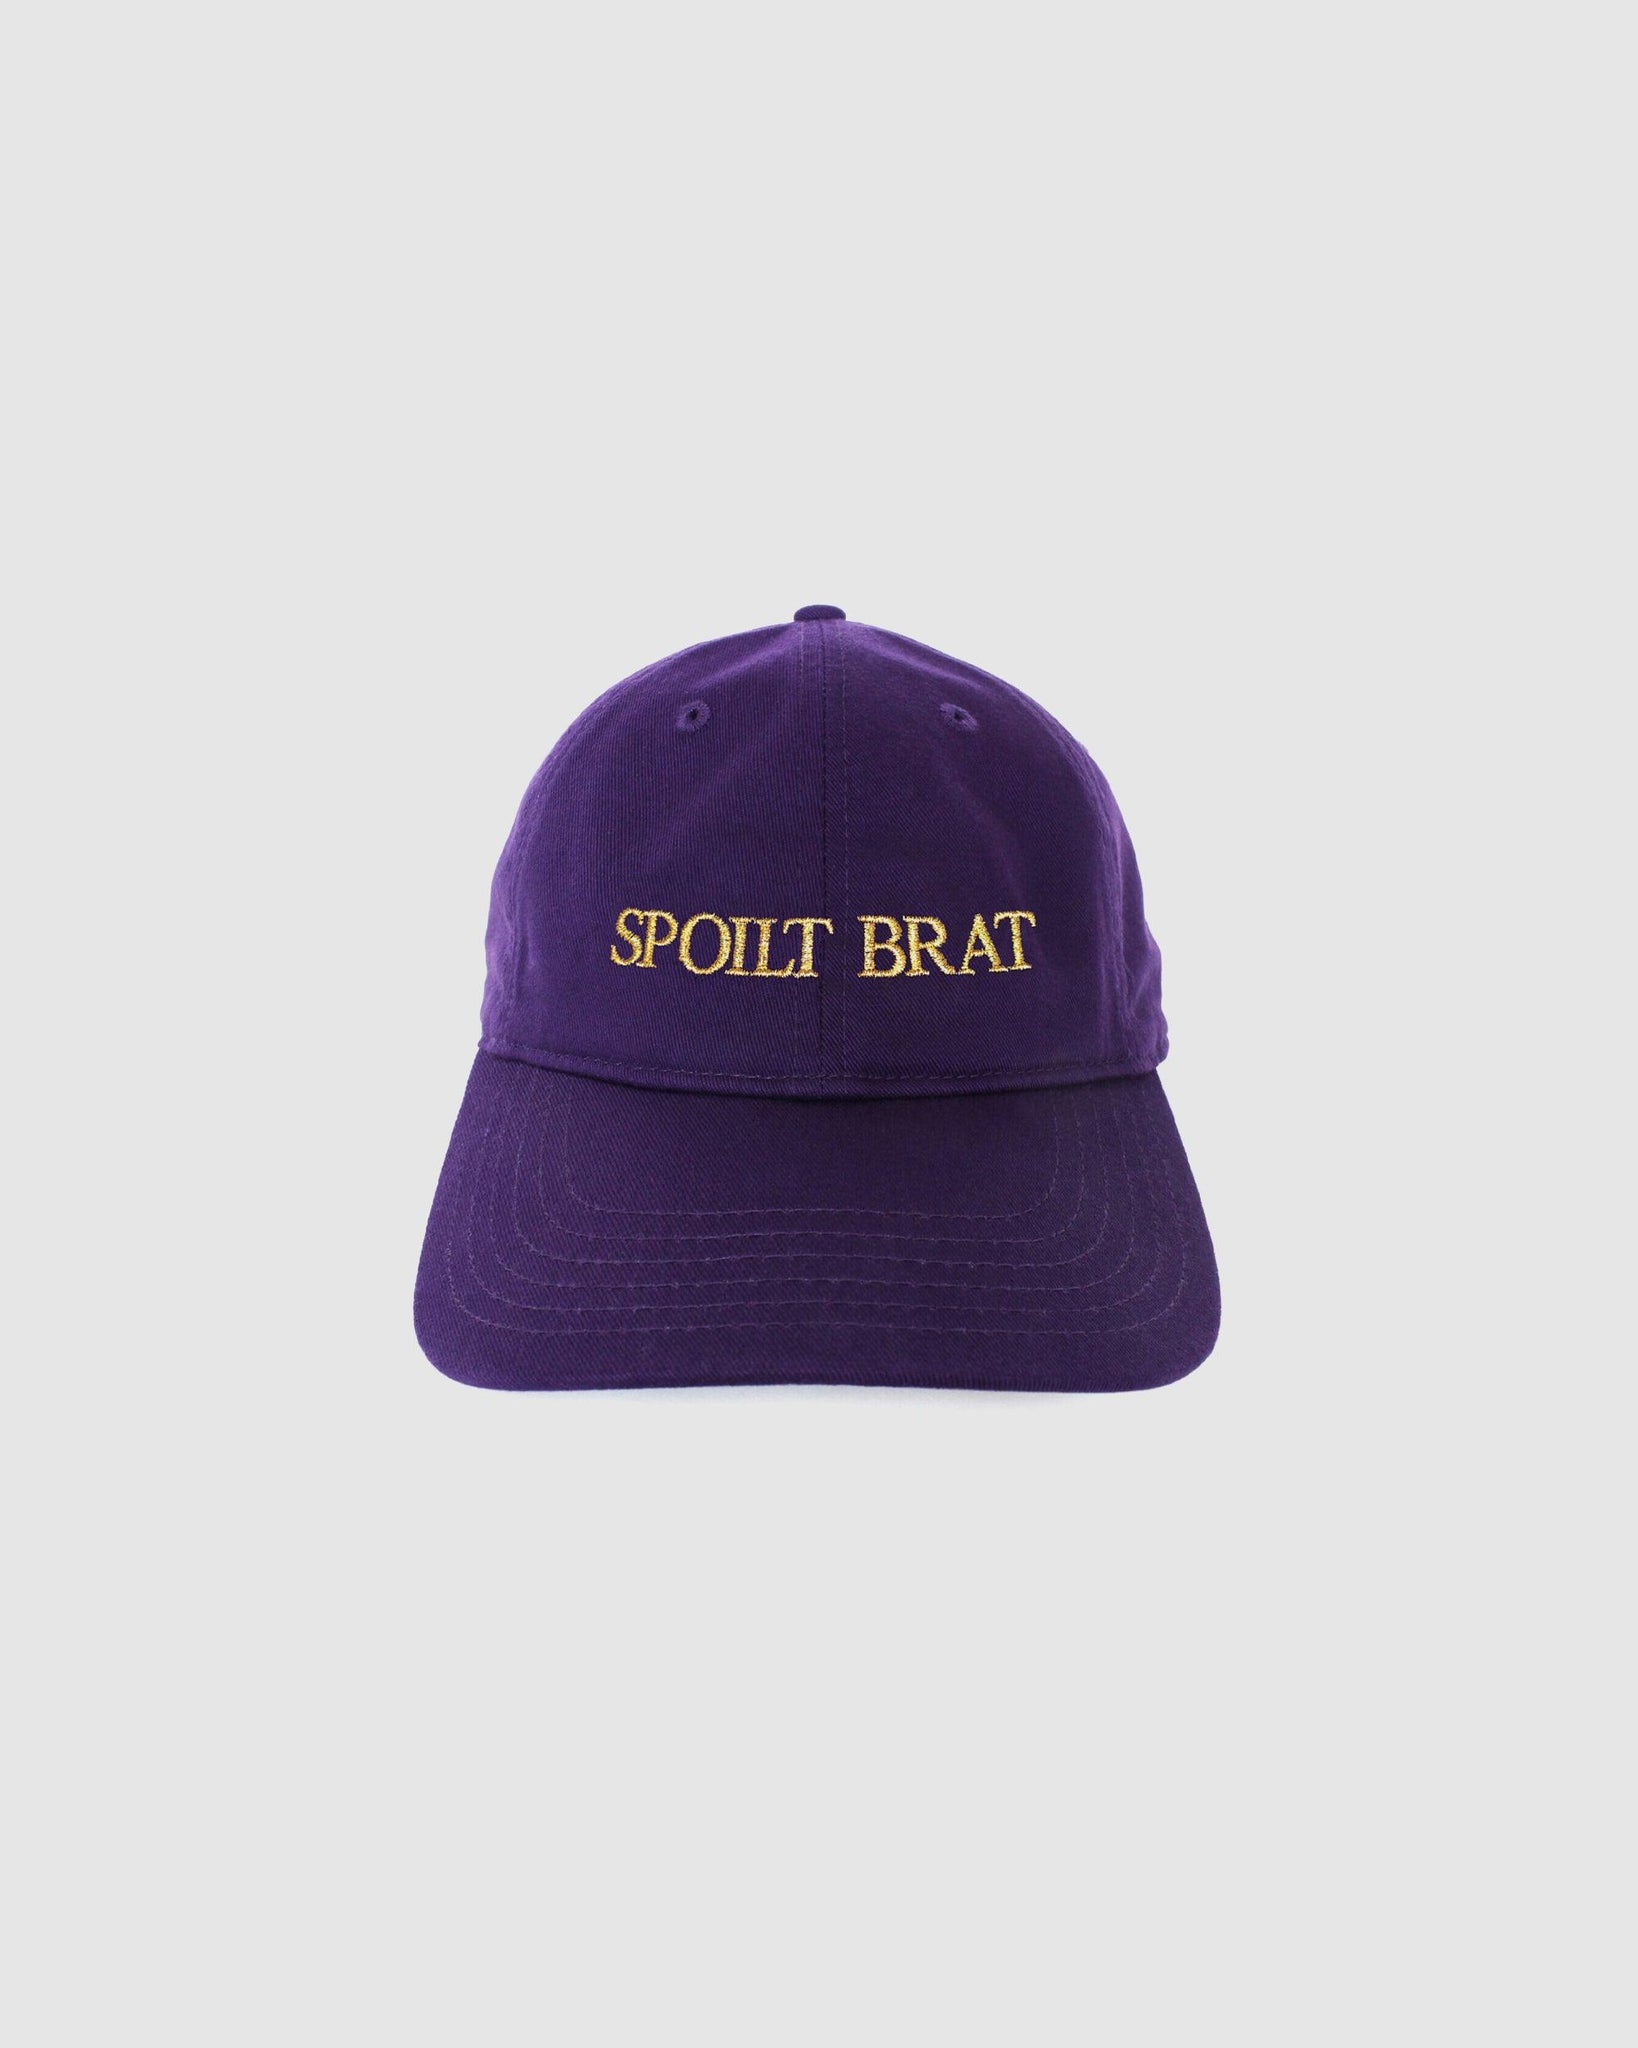 Spoilt Brat Hat - {{ collection.title }} - Chinatown Country Club 